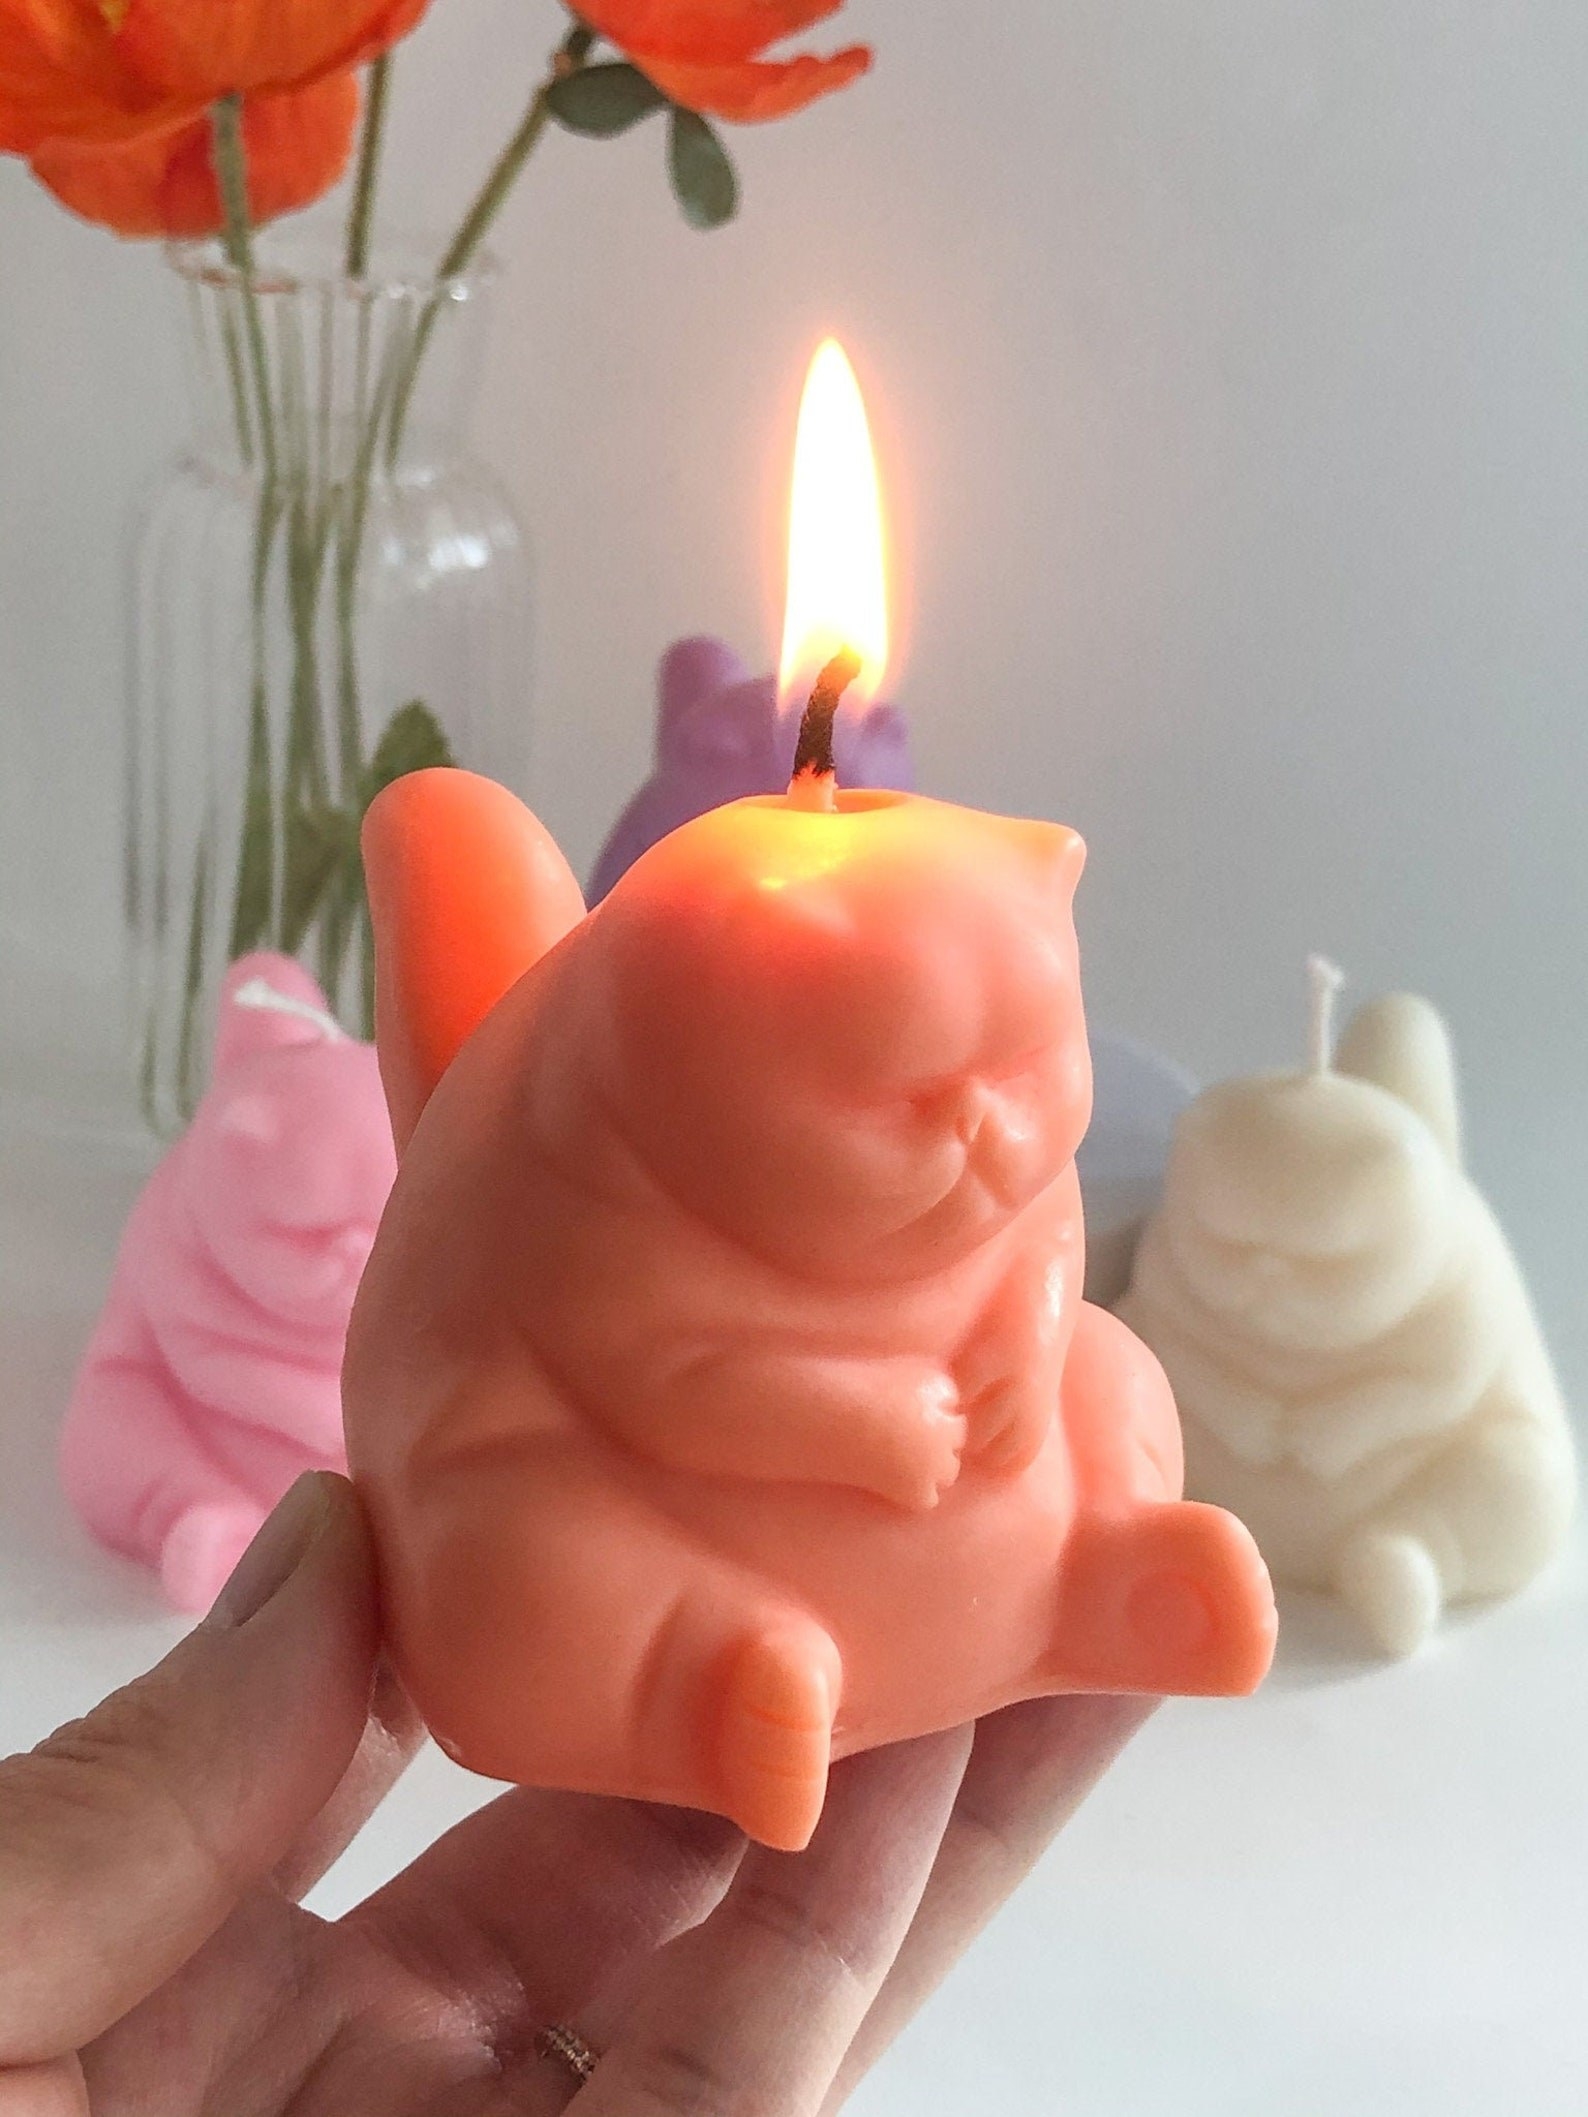 A person holding the candle in orange